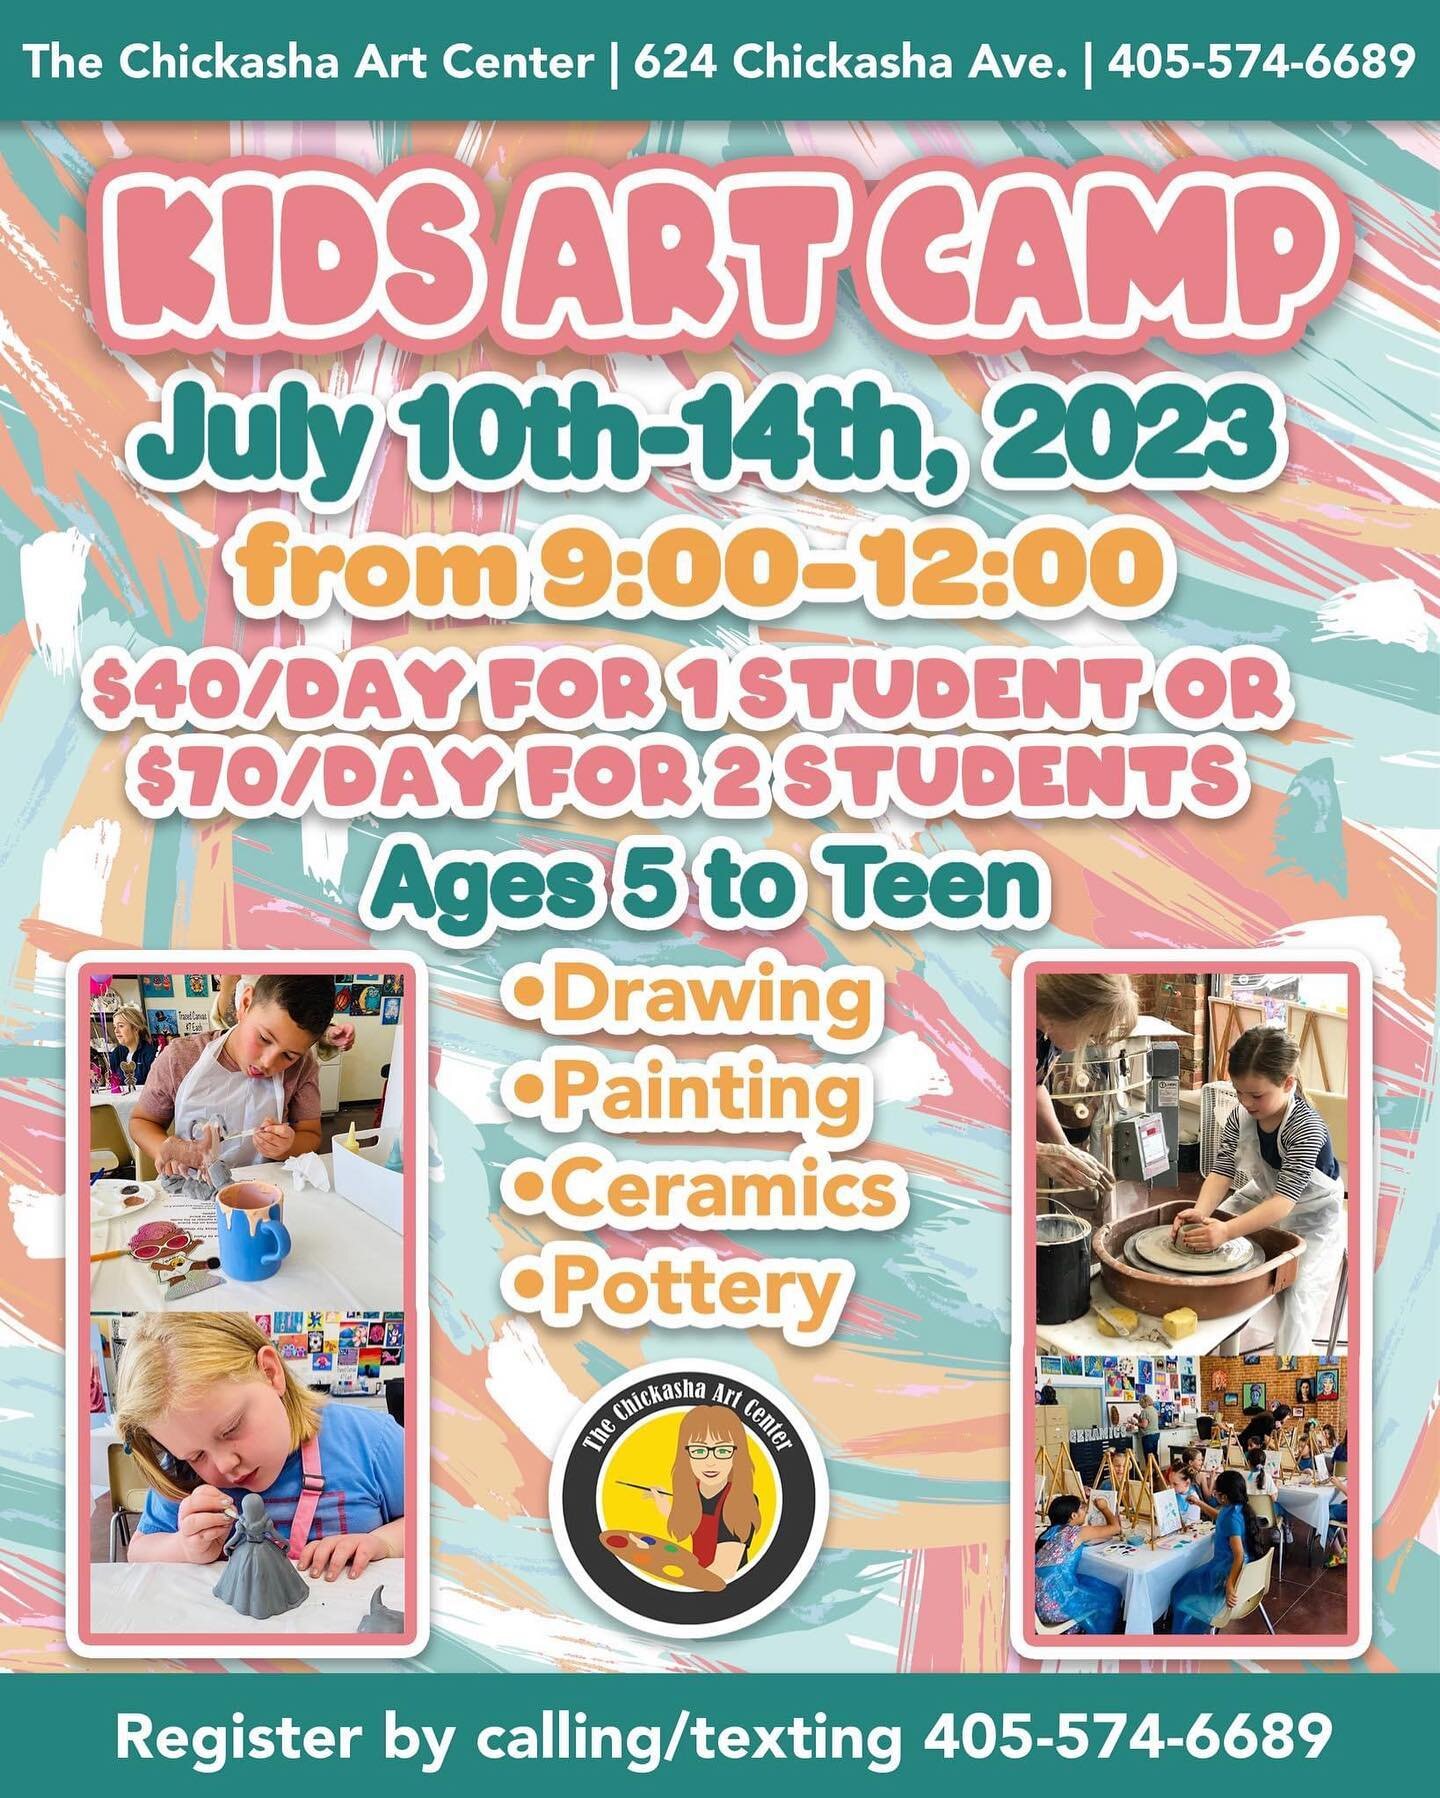 Join us for our Summer Kids Art Camp from July 10th-July 14th, 2023 from 9:00am-12:00pm daily. Students will have the opportunity to explore all different art mediums including drawing, painting, ceramics, and pottery on the wheel! 🎨
-
Sign up by ca